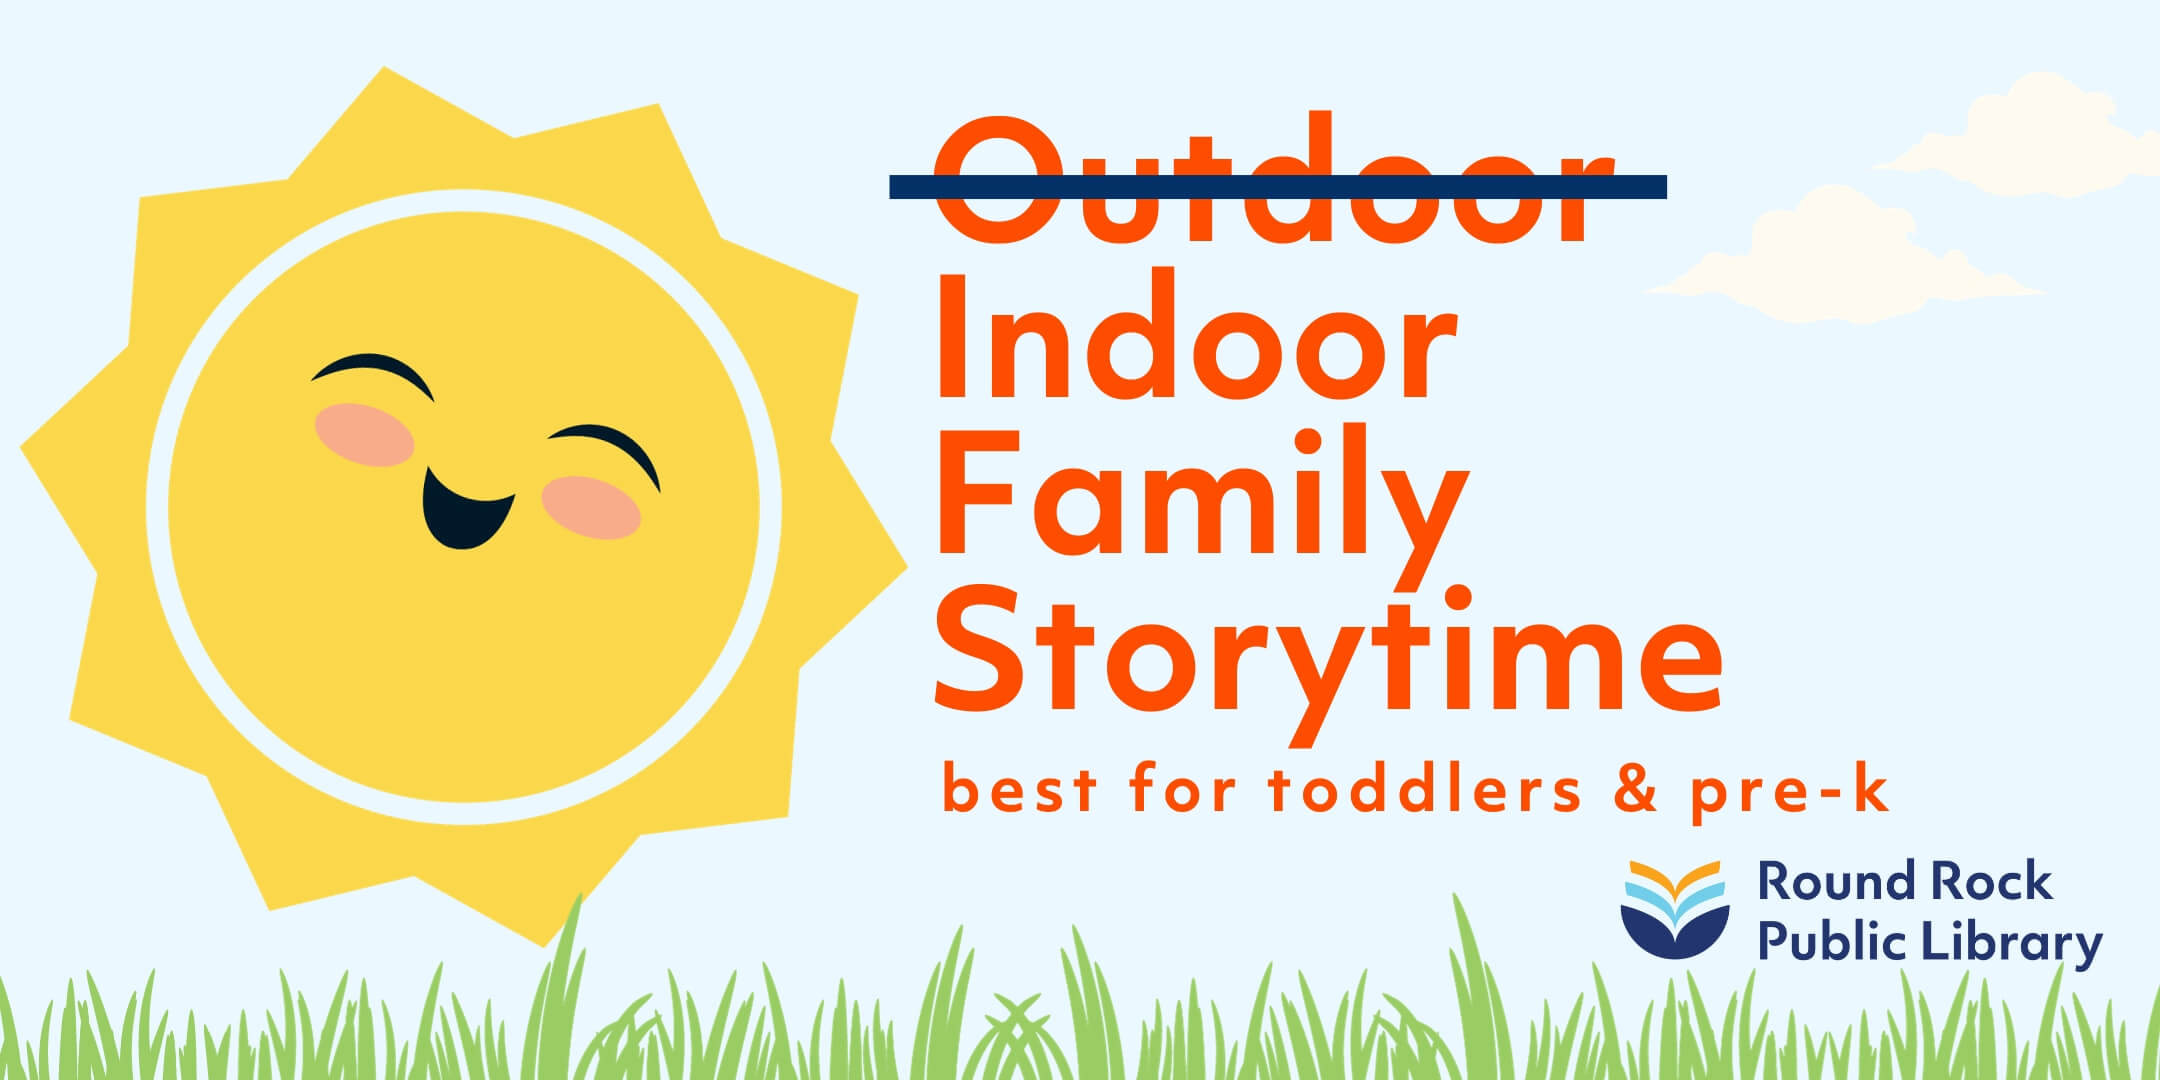 Outdoor Family Storytime will meet indoors this week